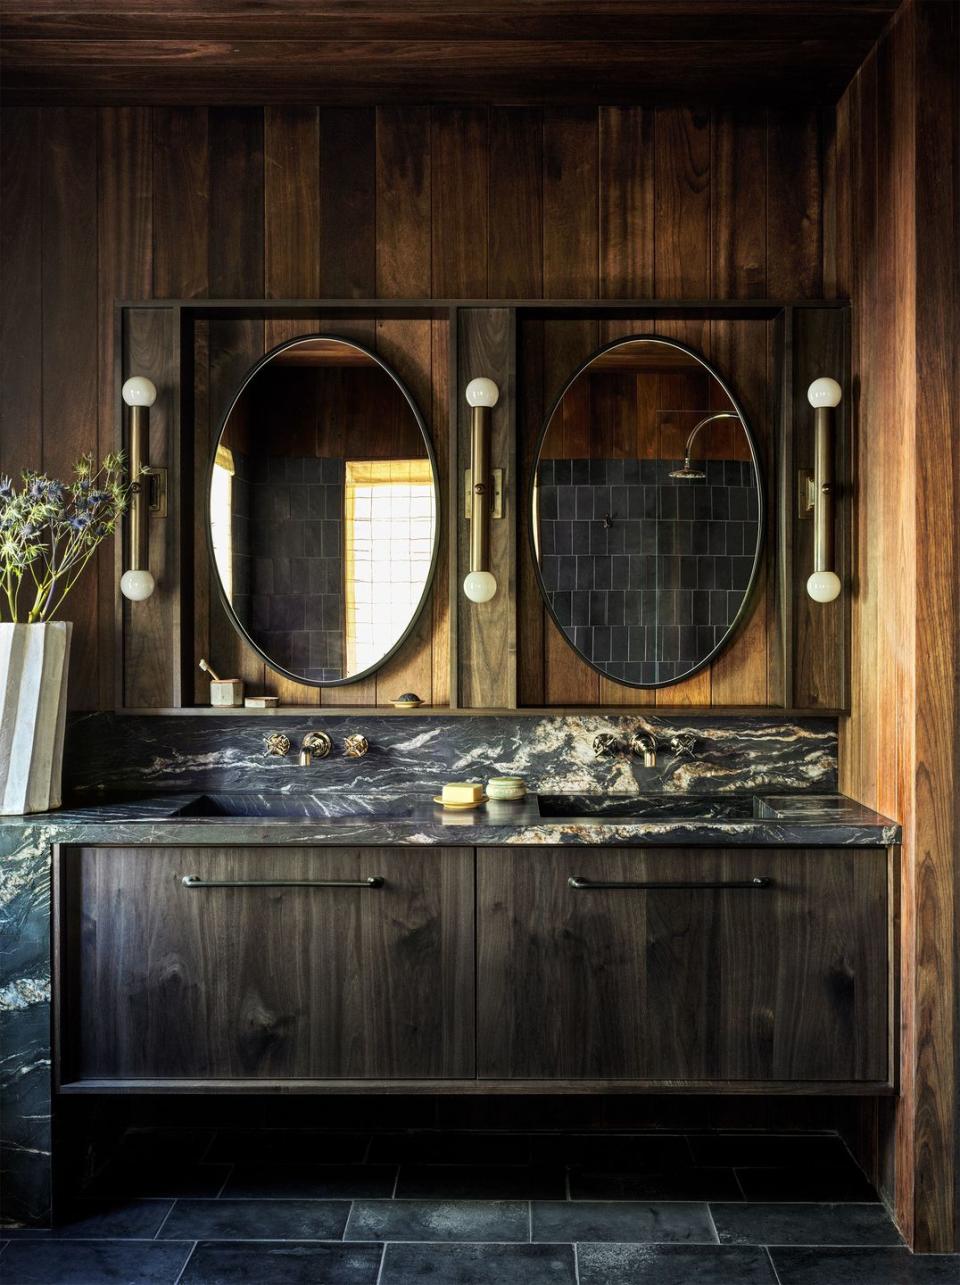 a bathroom has twin rectangular sinks in dark marble with iron walnut cabinets below, oval mirrors above each and three vertical sconces with small globes at top and bottom, spruce paneled walls, and black limestone floor